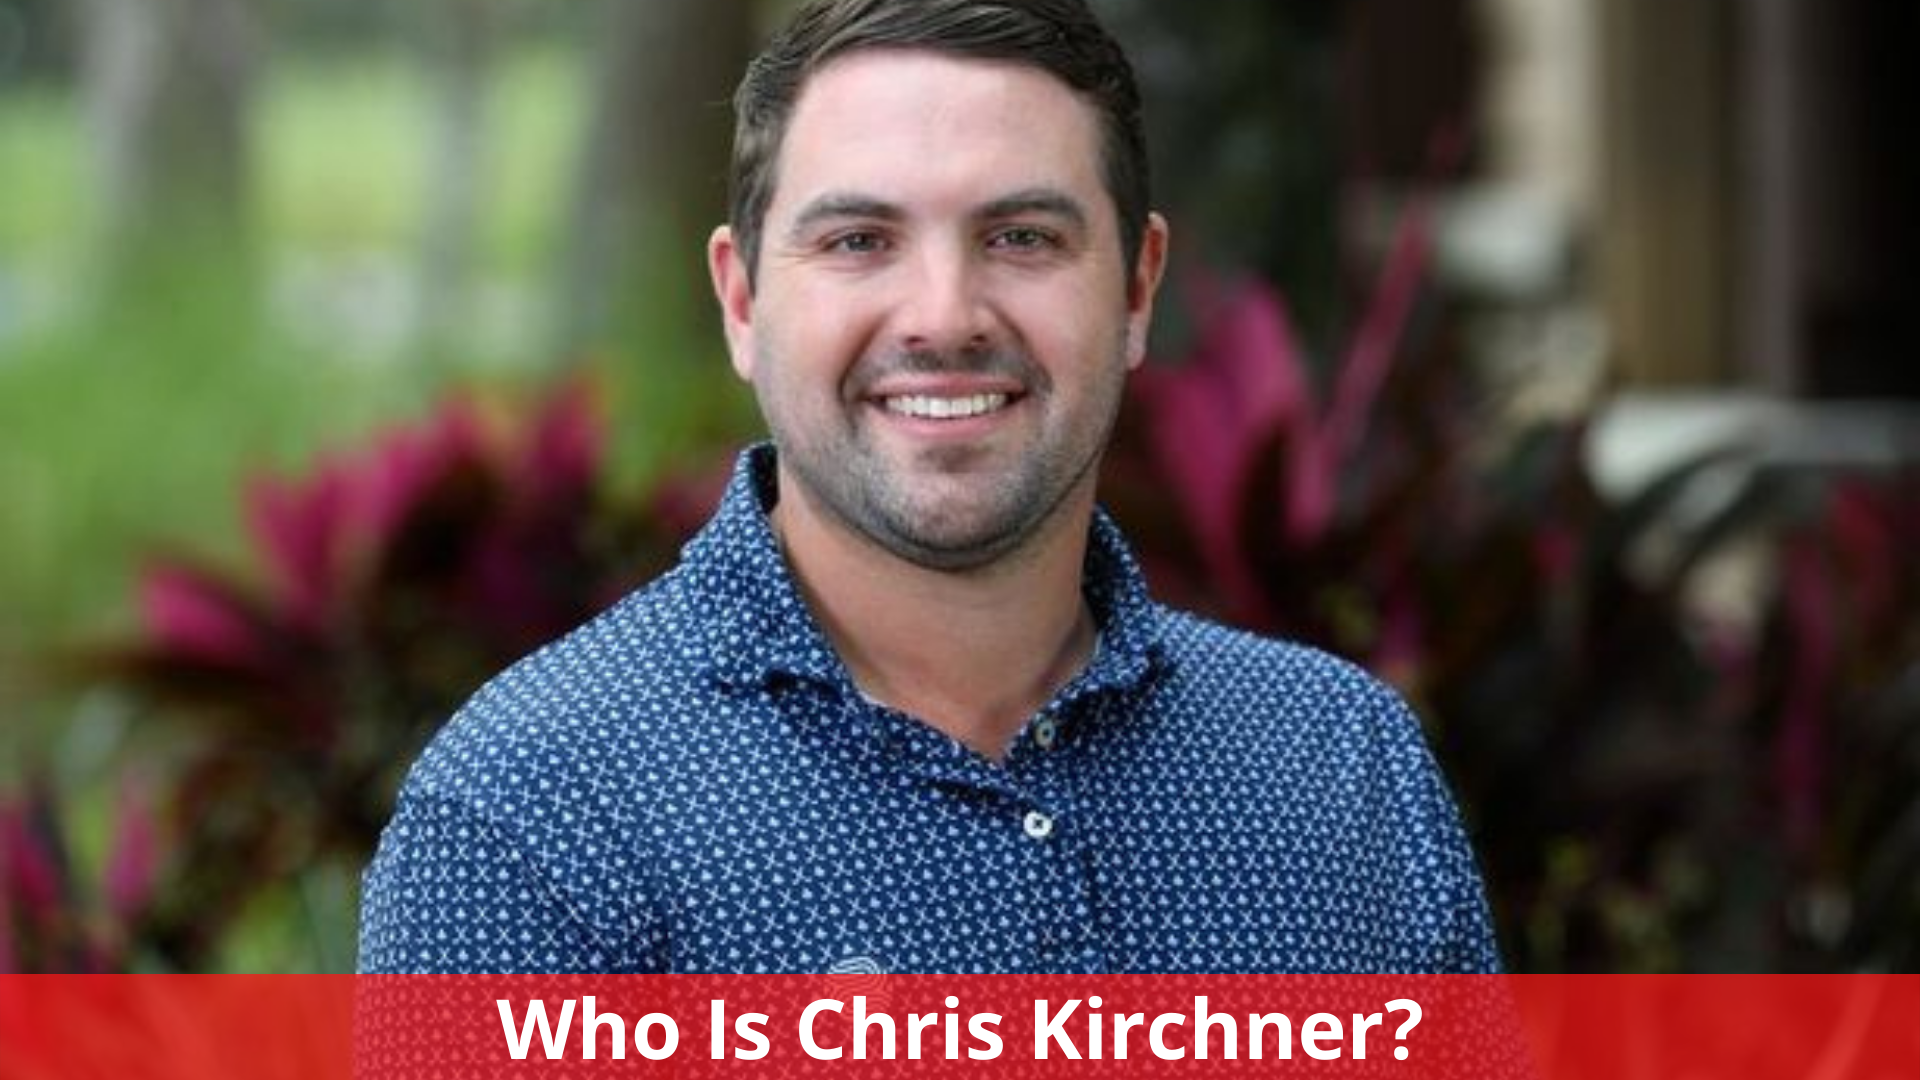 Who Is Chris Kirchner? What Is His Net Worth, Biography, Relationship Status?